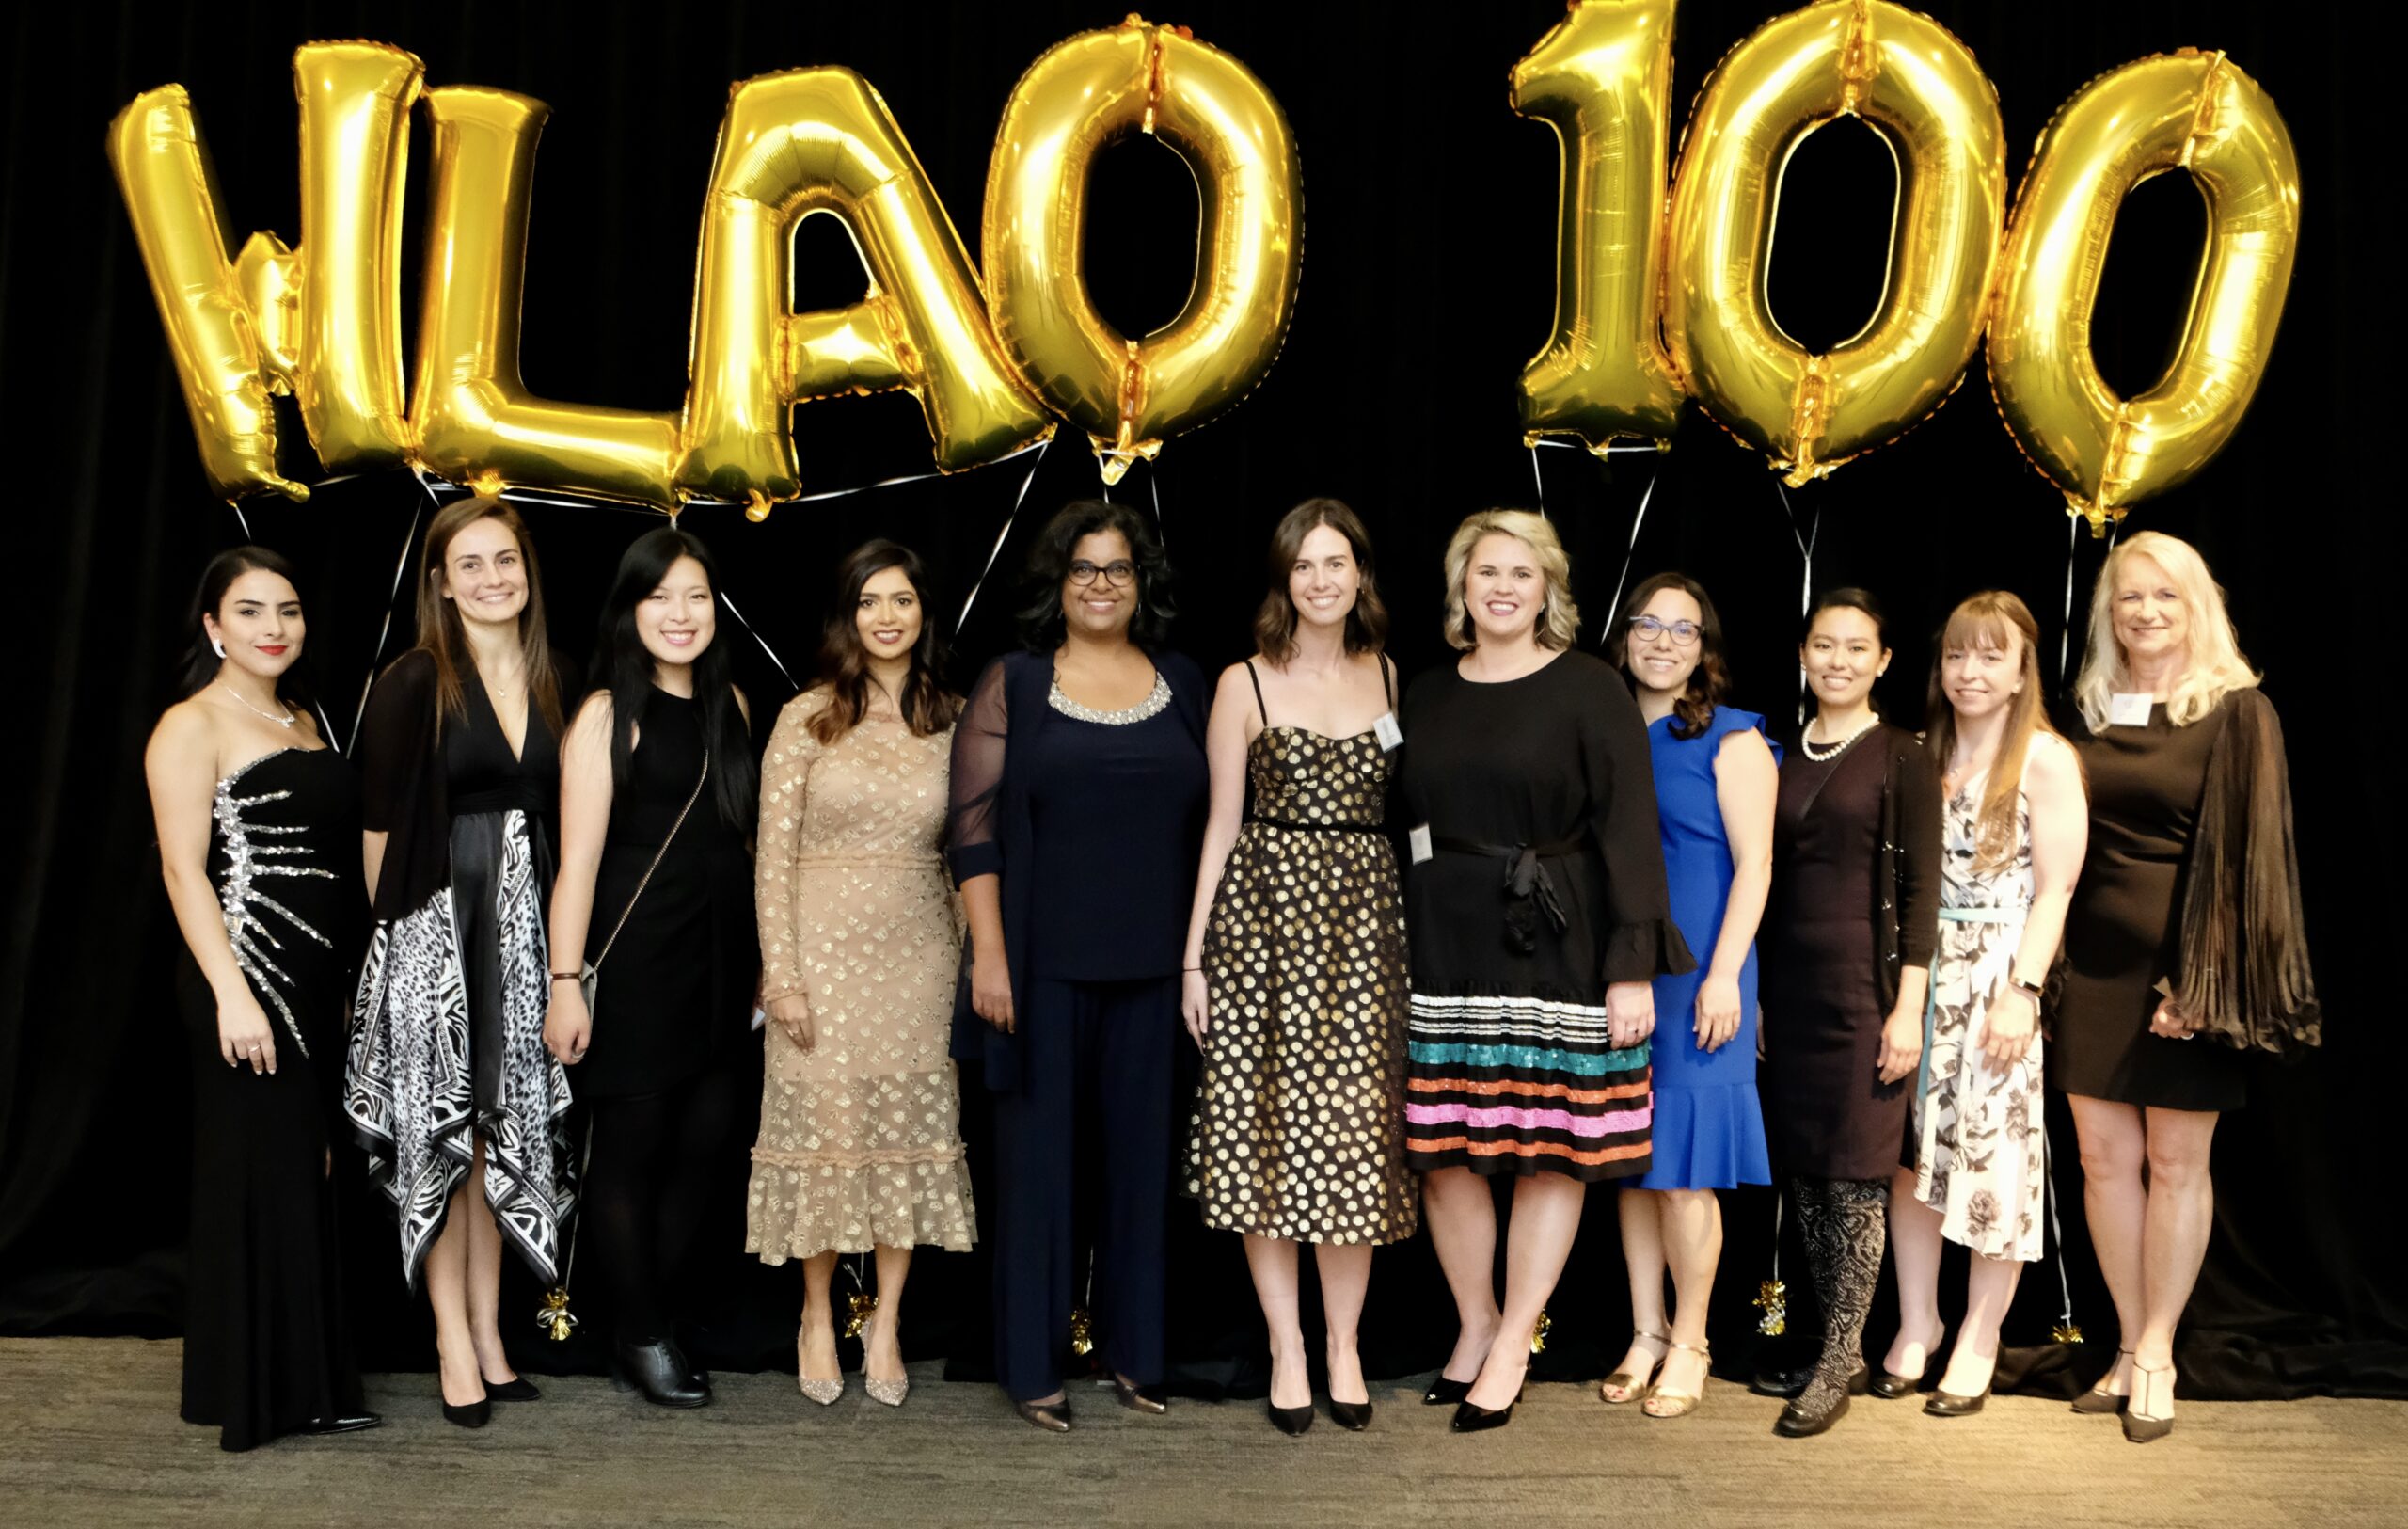 Ten women lined up in celebration of 100 years of the WLAO, with balloons depicting "100 years" floating above them.